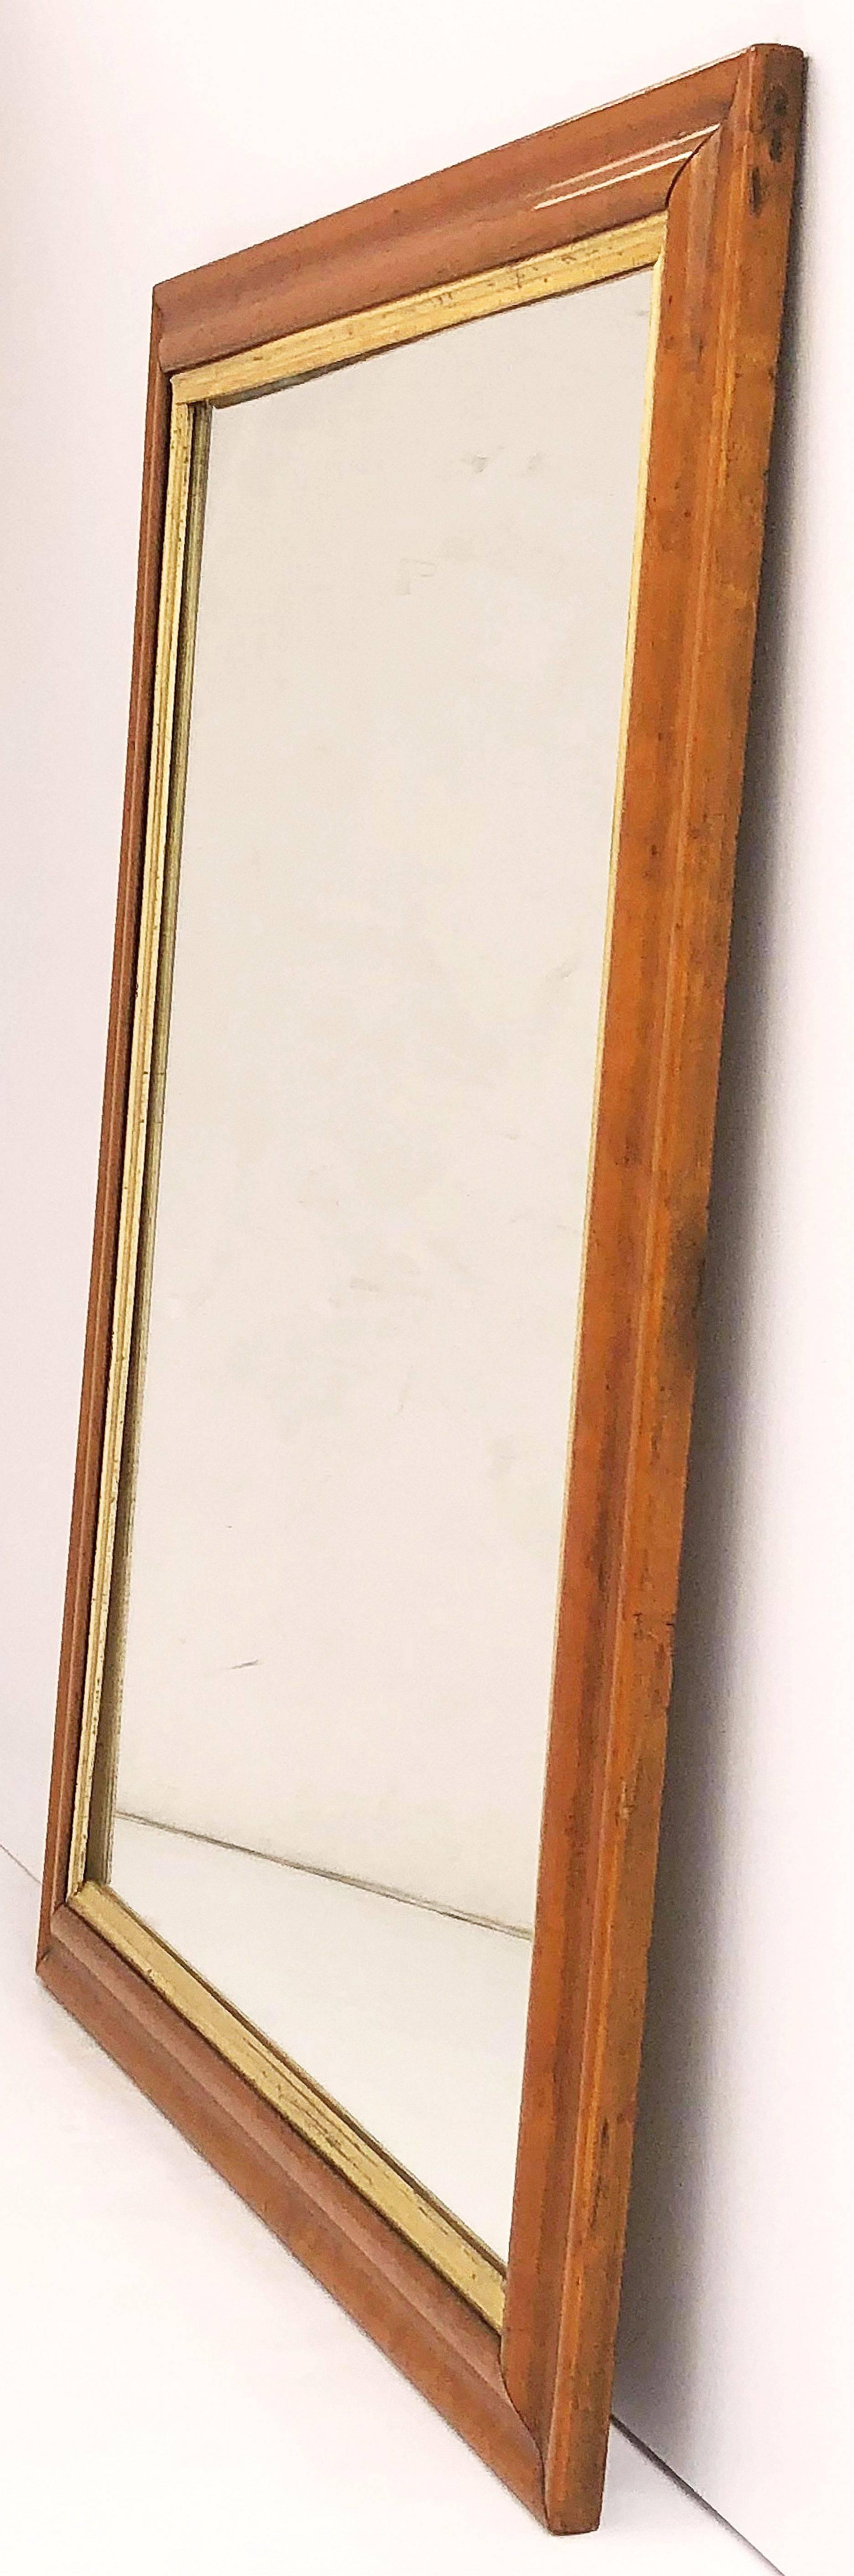 English Rectangular Maple and Giltwood Framed Mirror (H 32 x W 26) 4